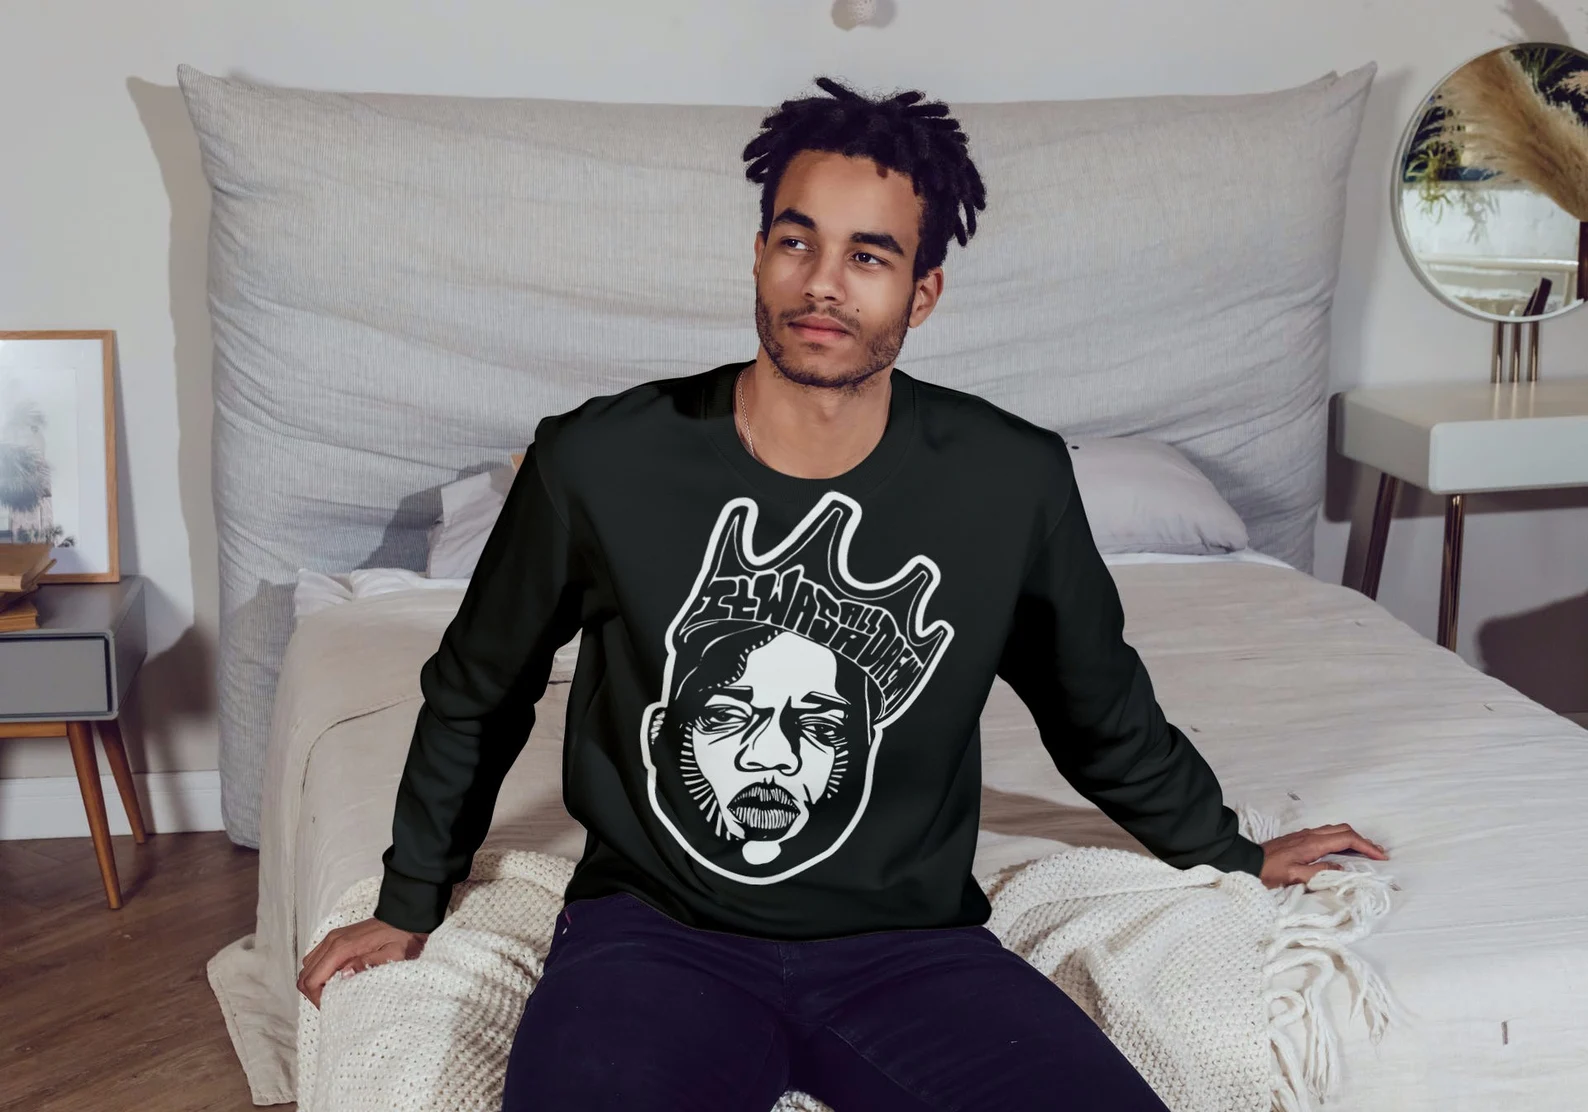 Classic black sweater with white Tupac illustration.